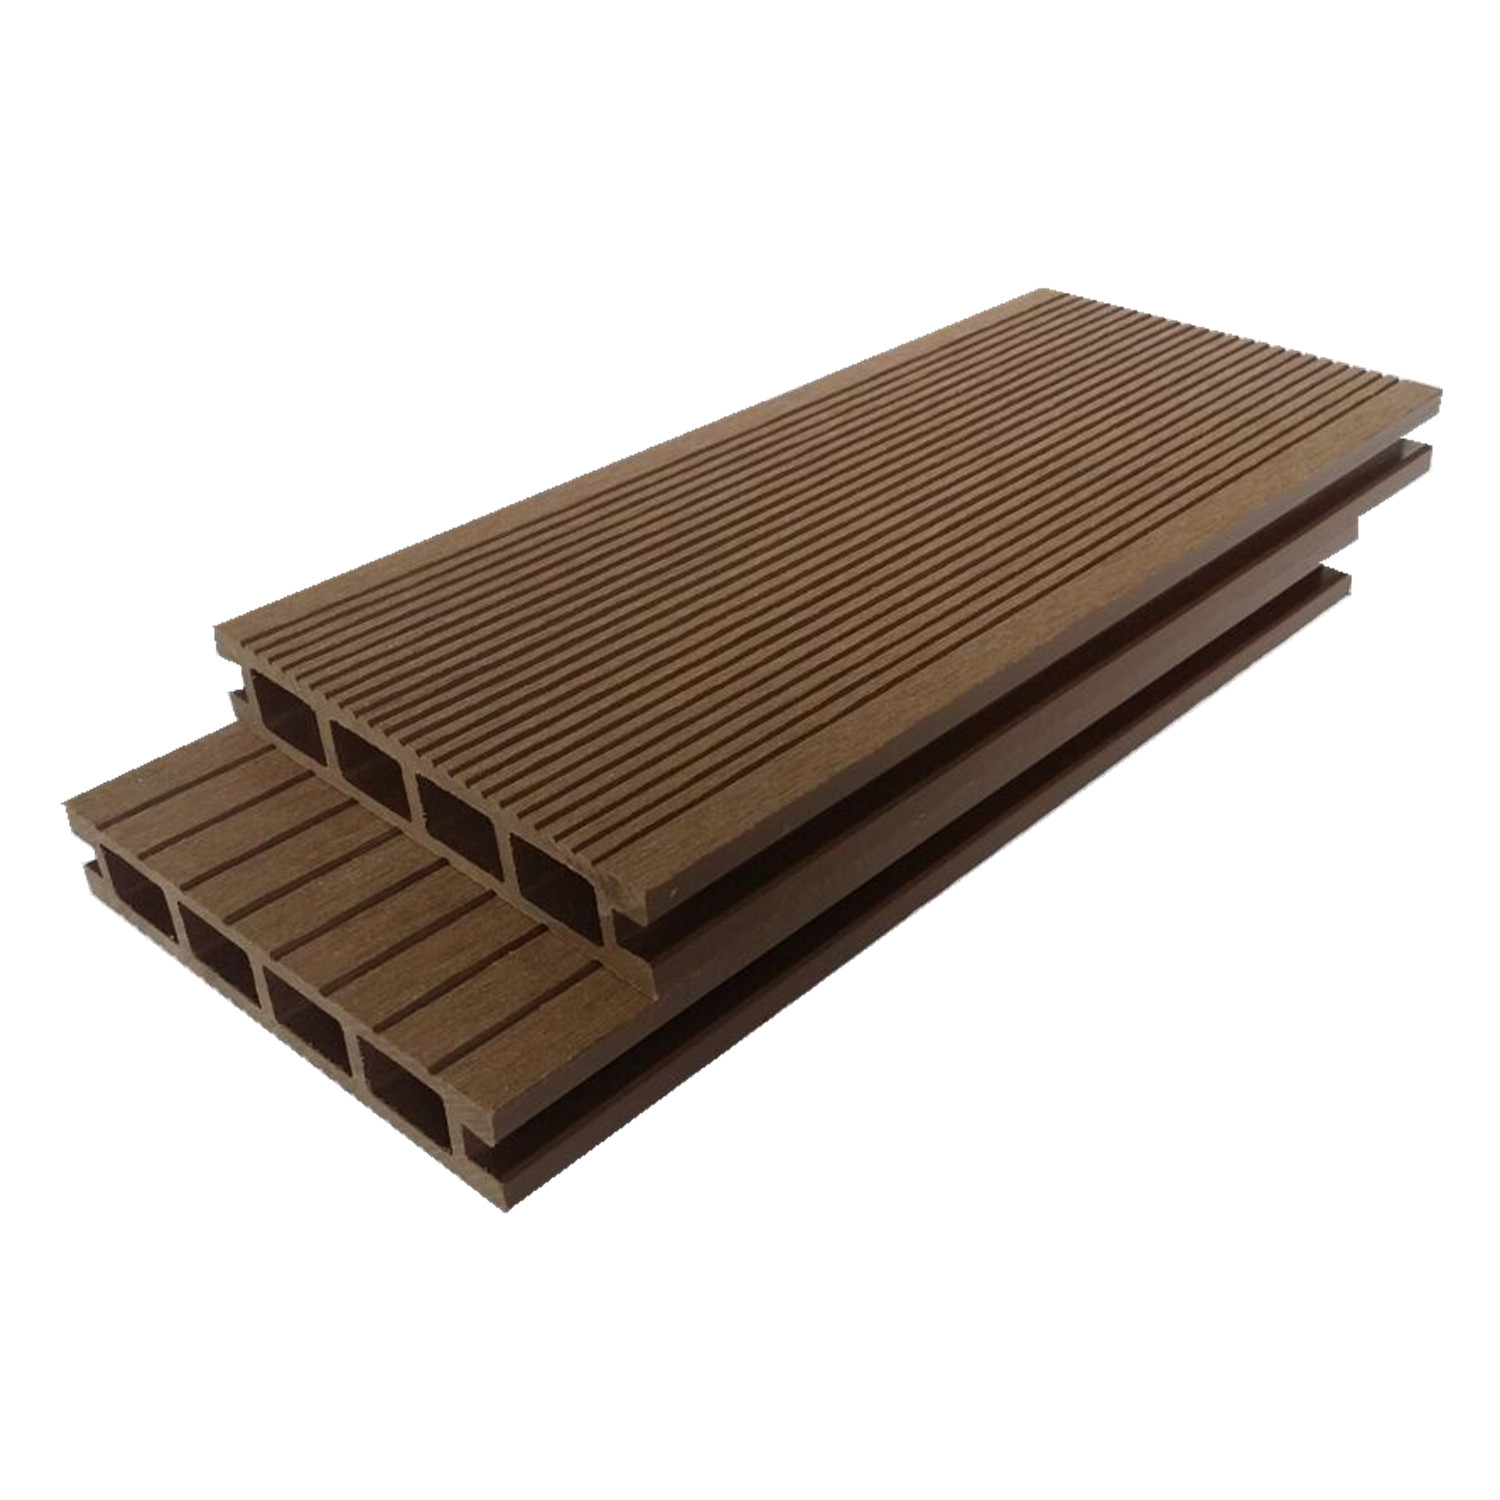 140H32 WPC decking wood plastic composite decking flooring outdoor use